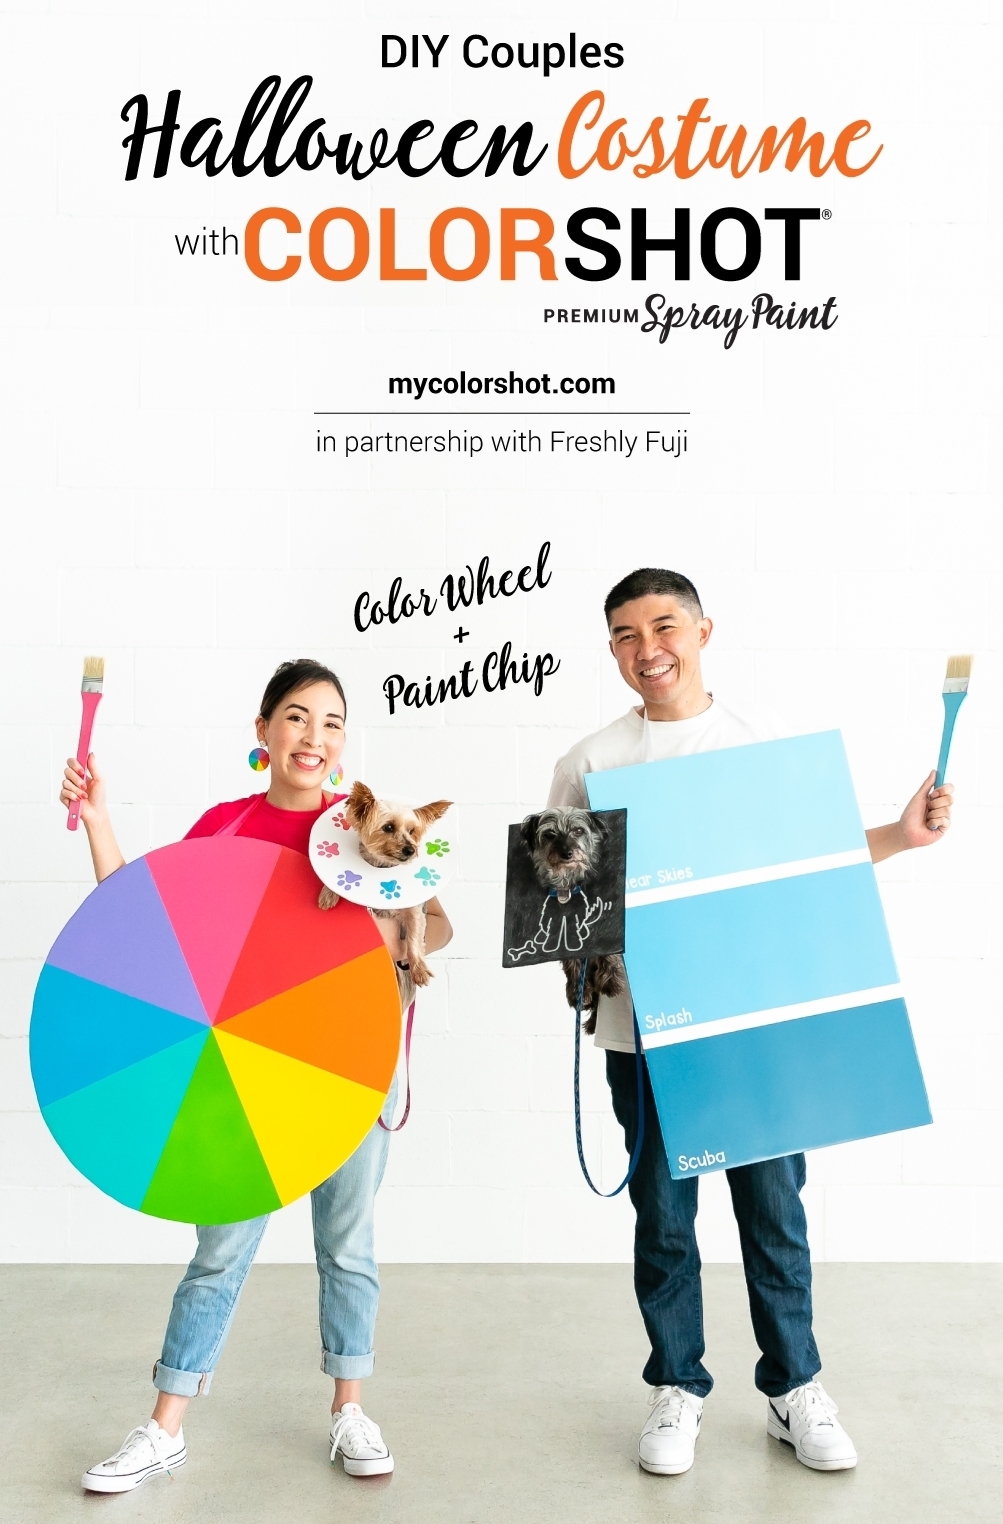 DIY Couples Halloween Costume with COLORSHOT